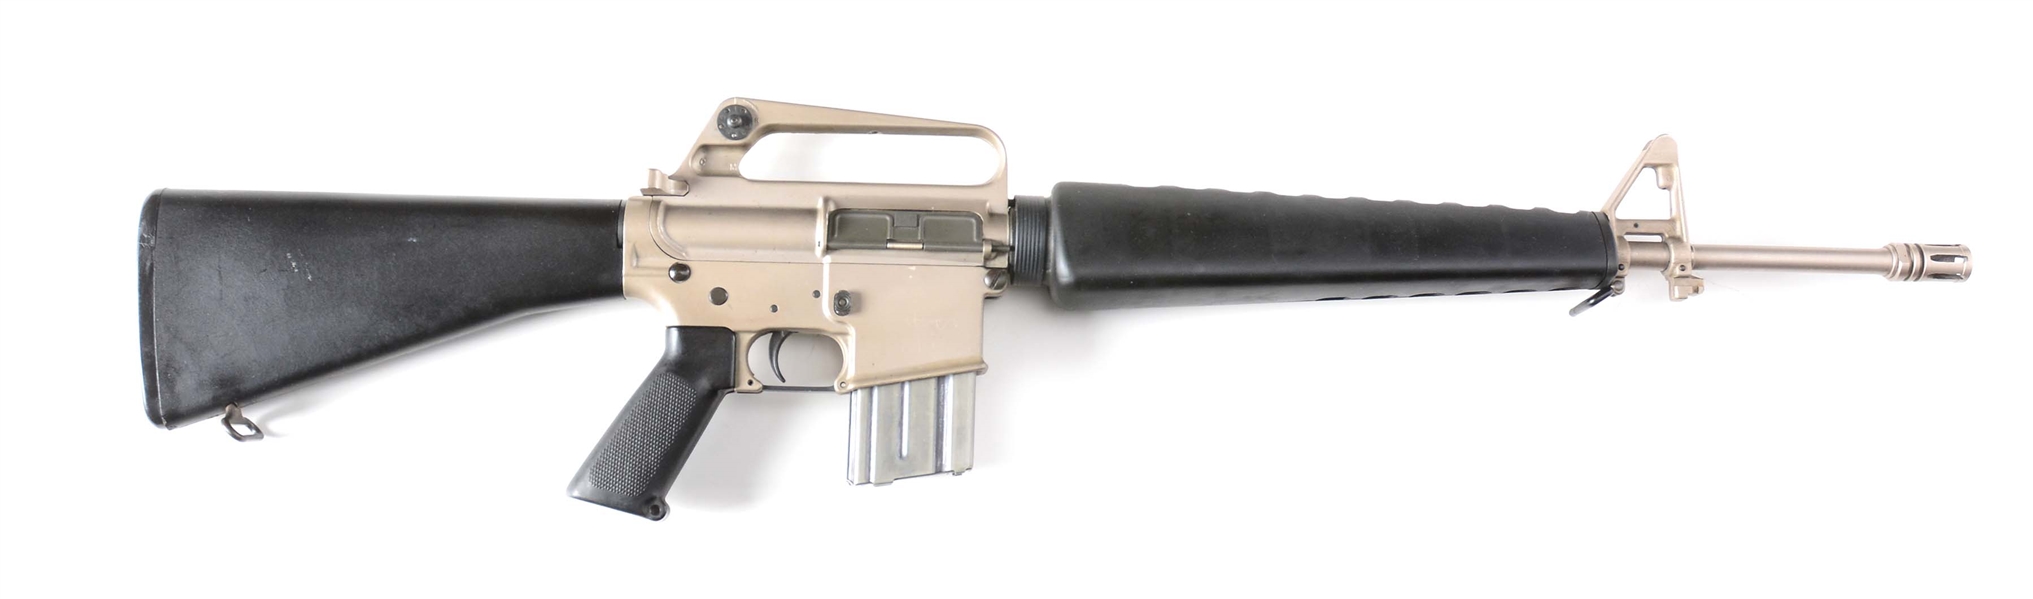 (M) VERY RARE ELECTROLESS-NICKEL PRE-BAN COLT AR-15 MODEL SP1 SEMI-AUTOMATIC RIFLE (1983).